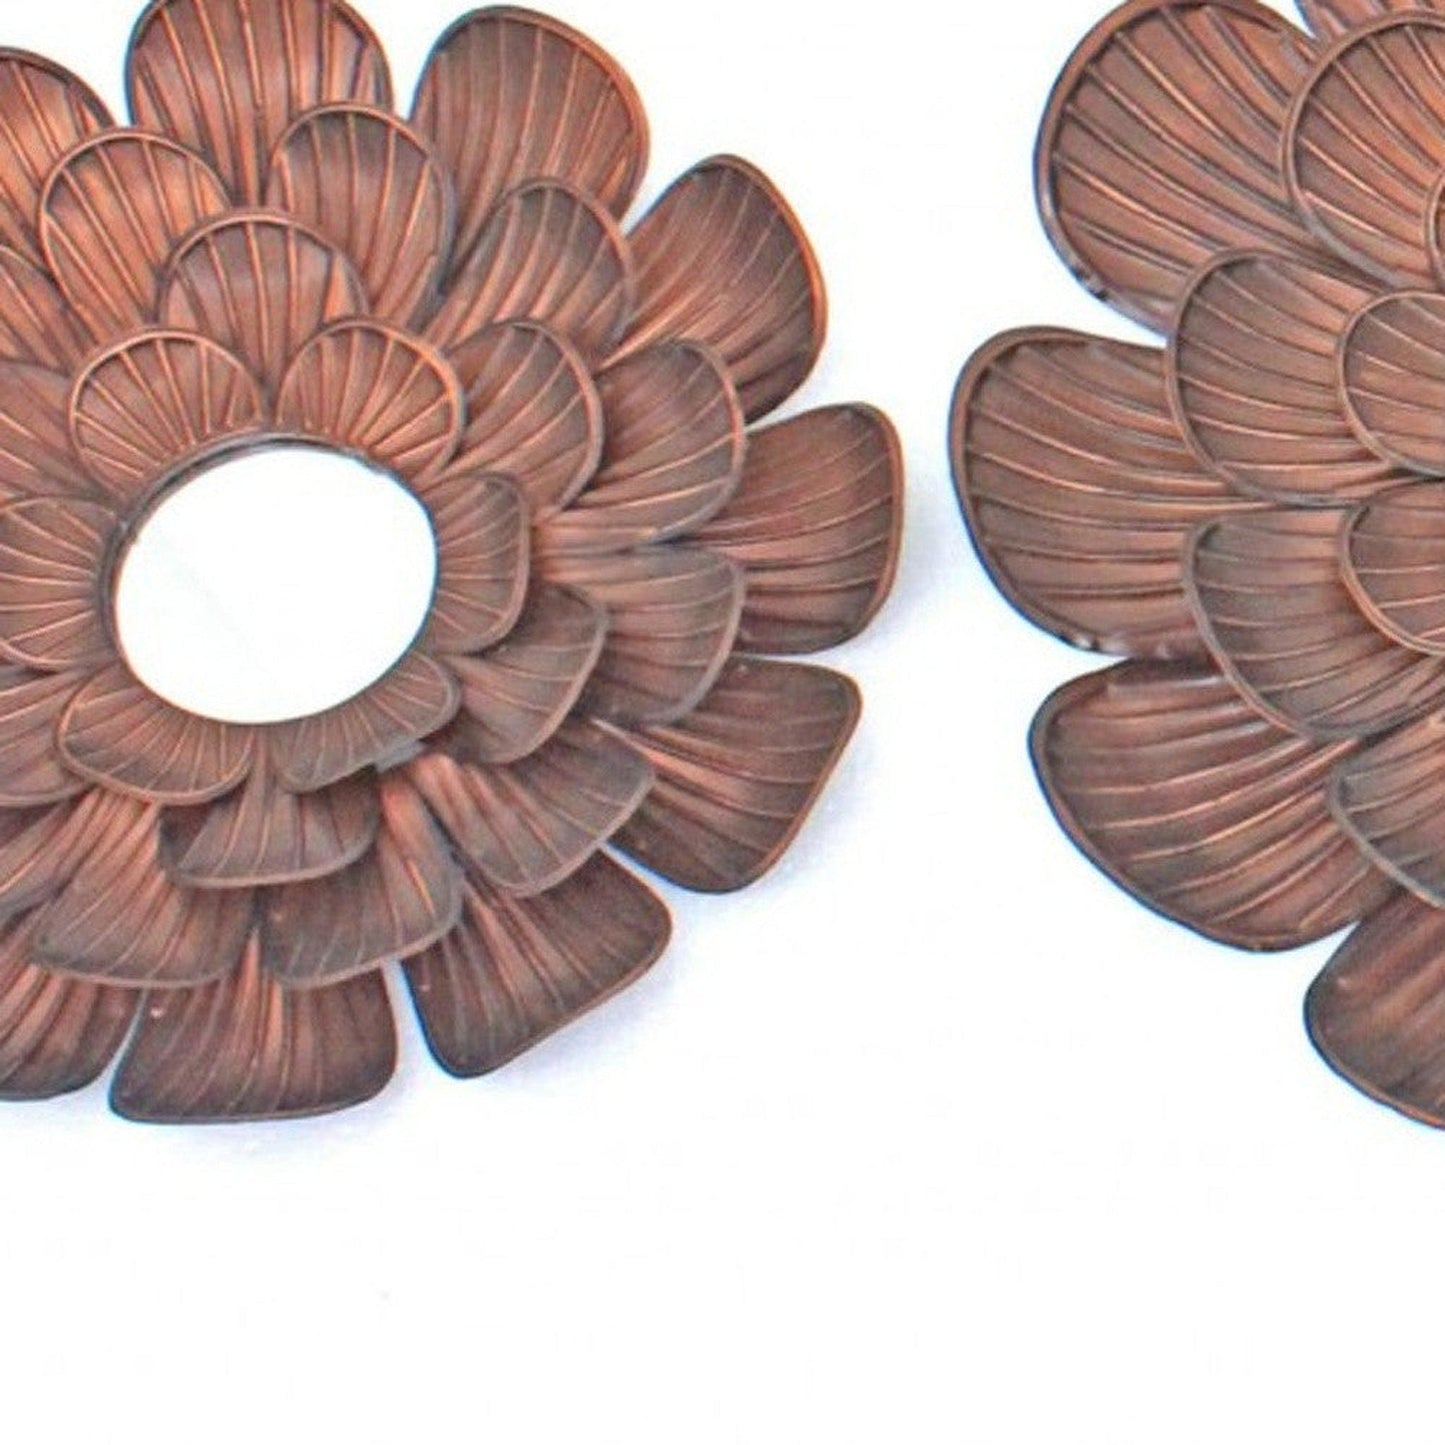 HomeRoots 3 Piece Vintage Metal Blooming Flower Wall Mirror In Copper Finish